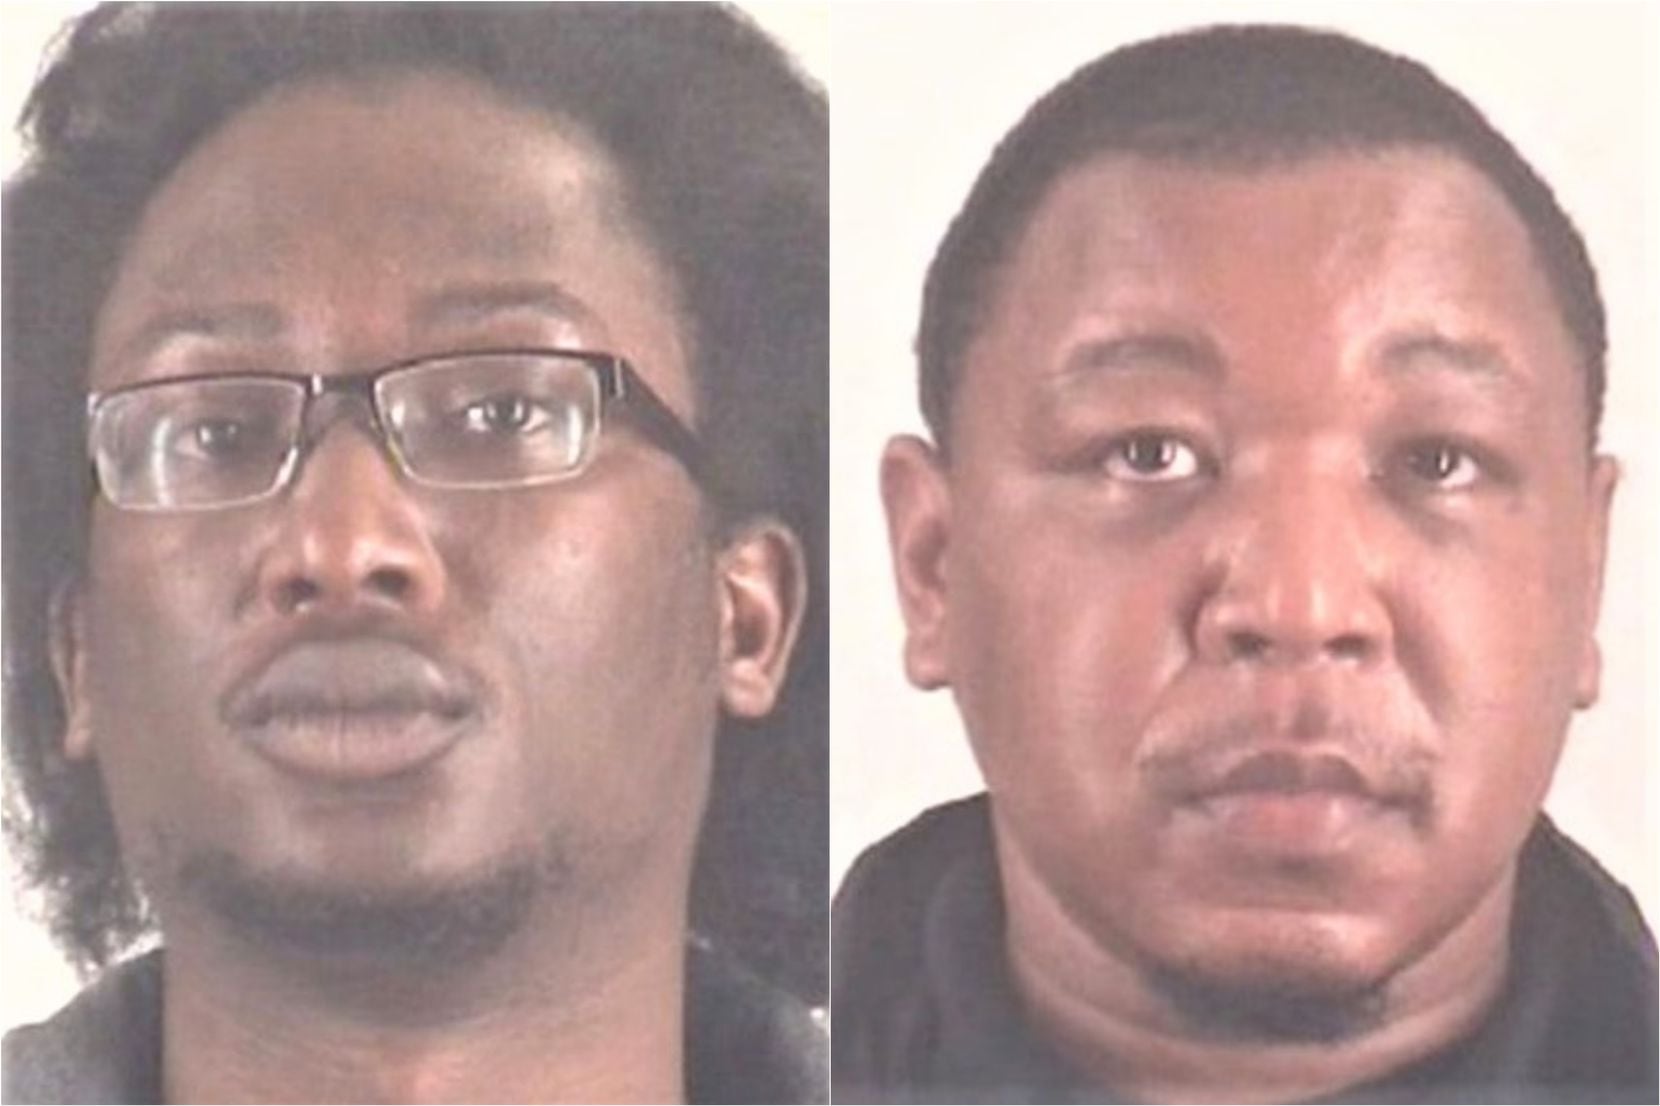 Amari Boone's foster fathers, Joseph Delancy (left) and Deondrick Foley, are charged with...